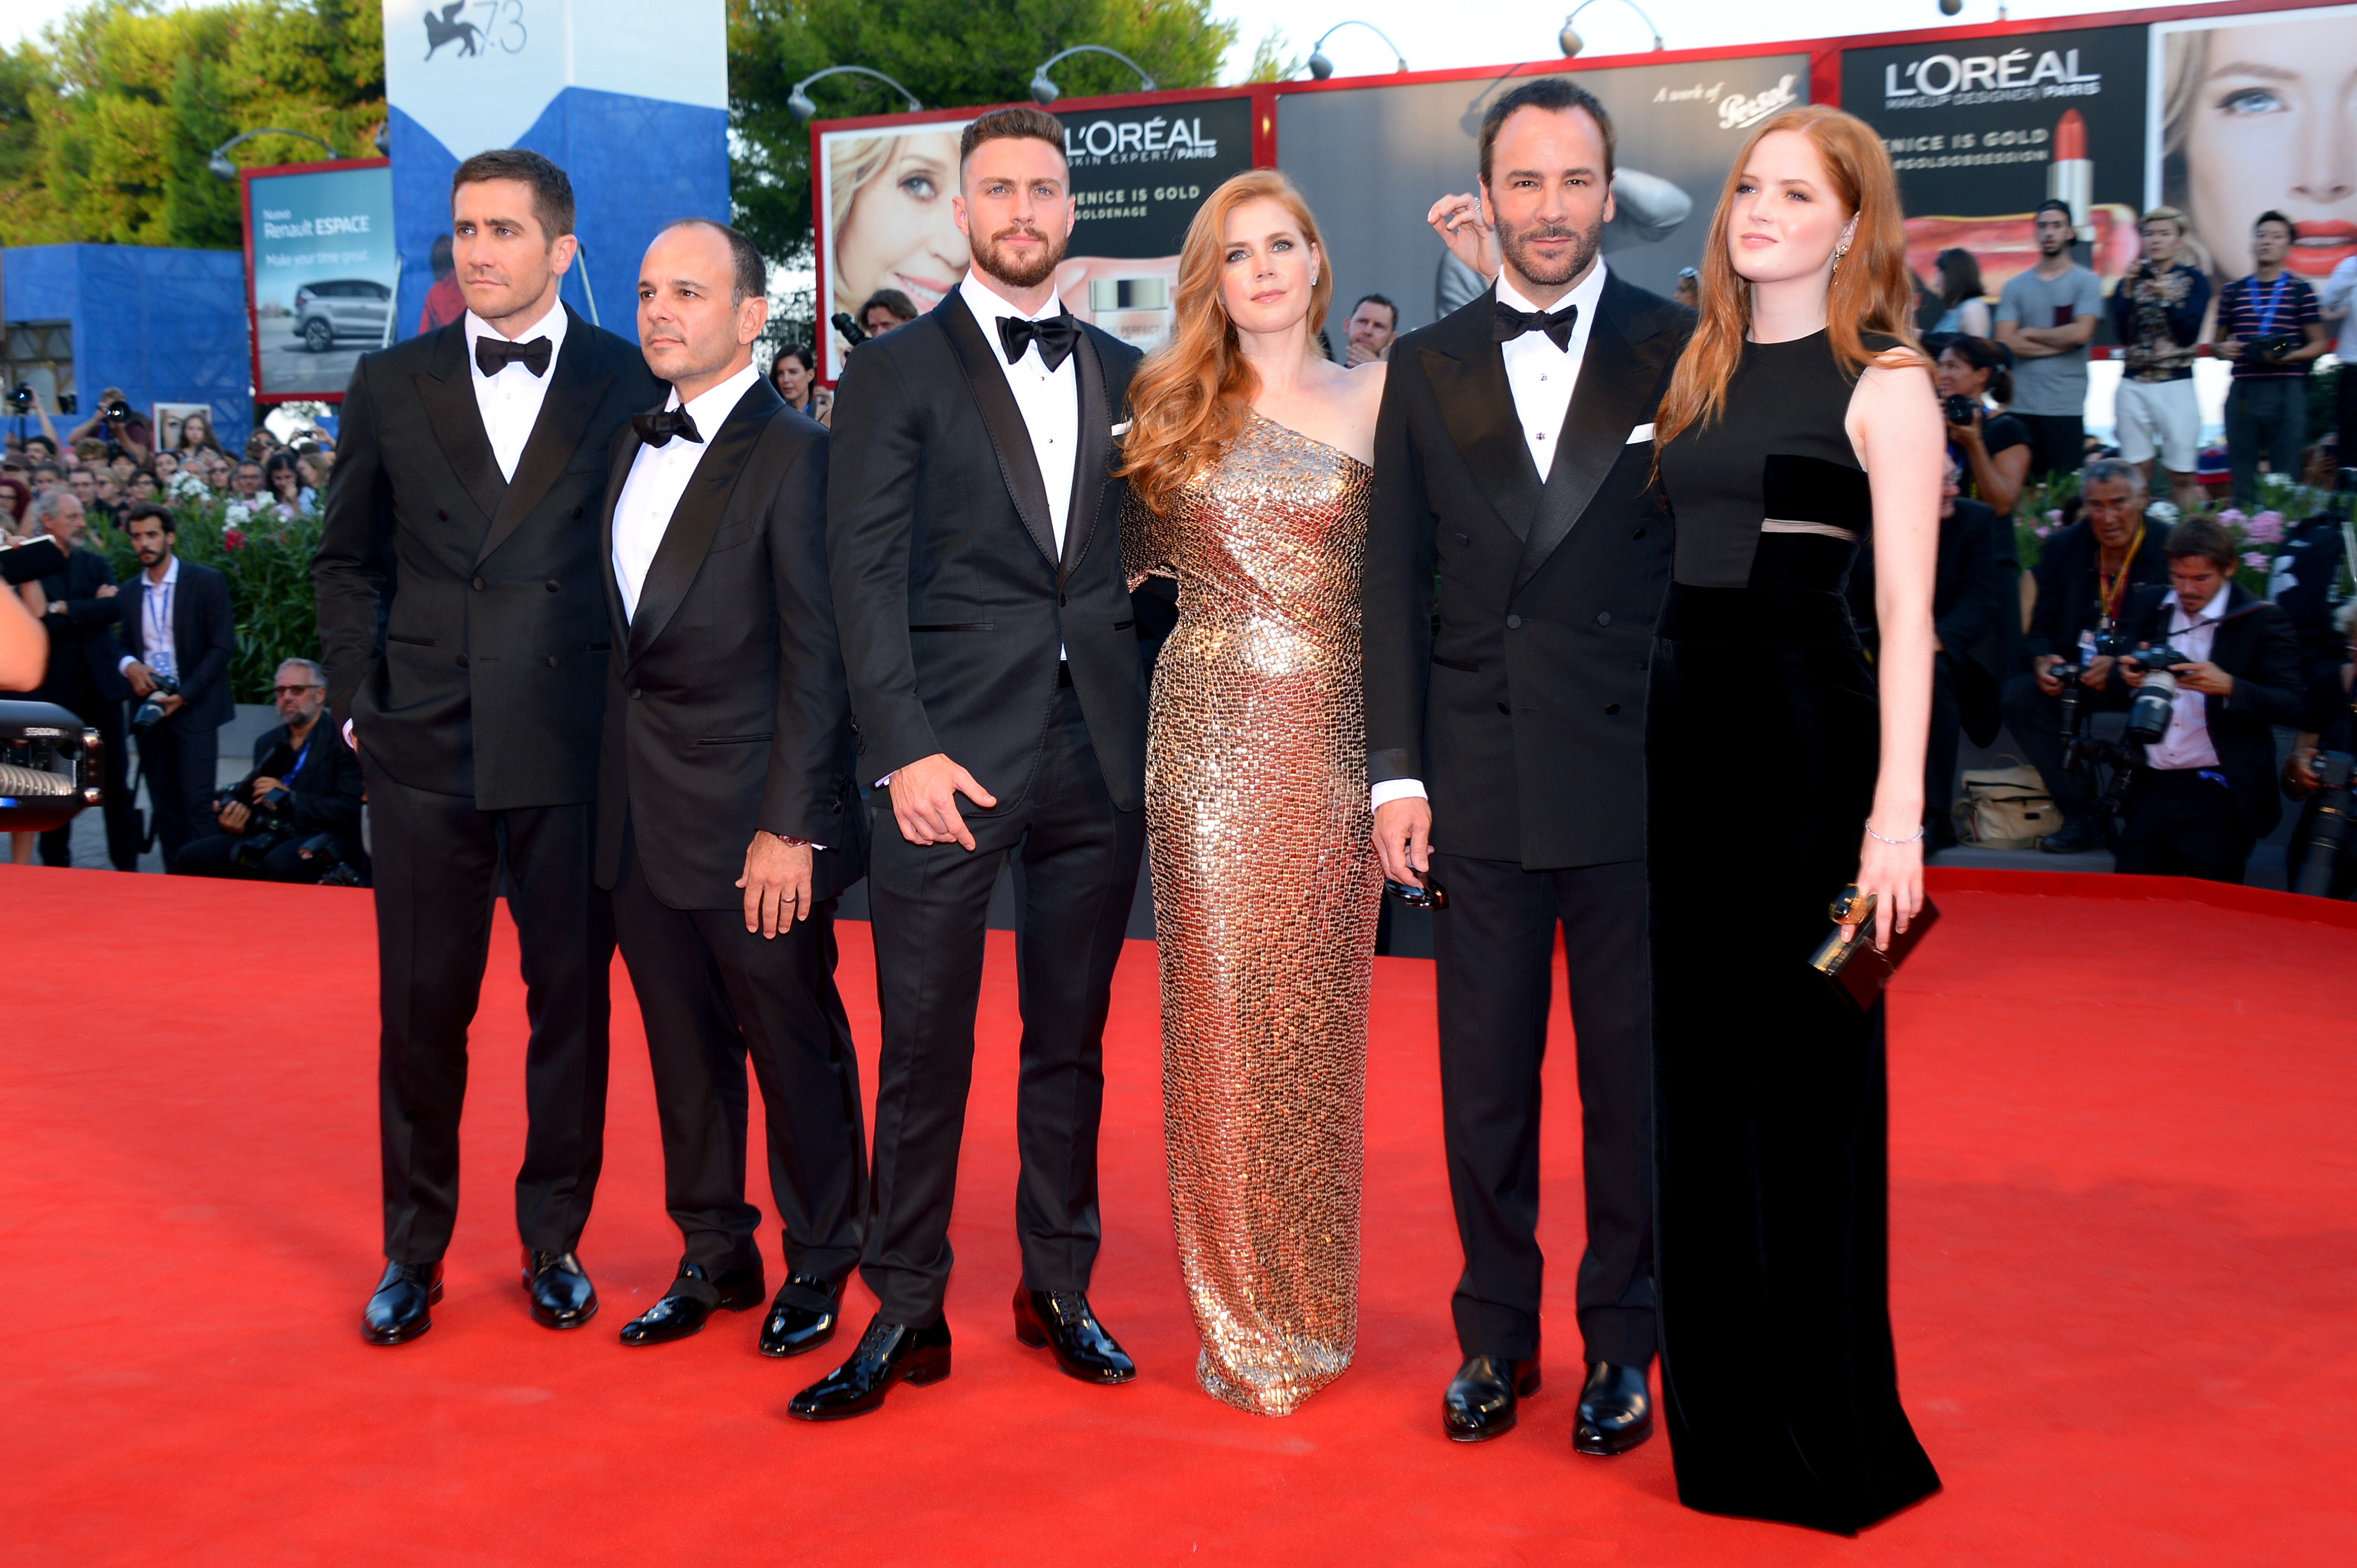 VENICE, ITALY - SEPTEMBER 02:  Jake Gyllenhaal, Robert Salerno, Aaron Taylor Johnson, Amy Adams, Tom Ford and Ellie Bamber  attend the premiere of 'Nocturnal Animals' during the 73rd Venice Film Festival at Sala Grande on September 2, 2016 in Venice, Italy.  (Photo by Dominique Charriau/WireImage) (Dominique CharriauWireImage)